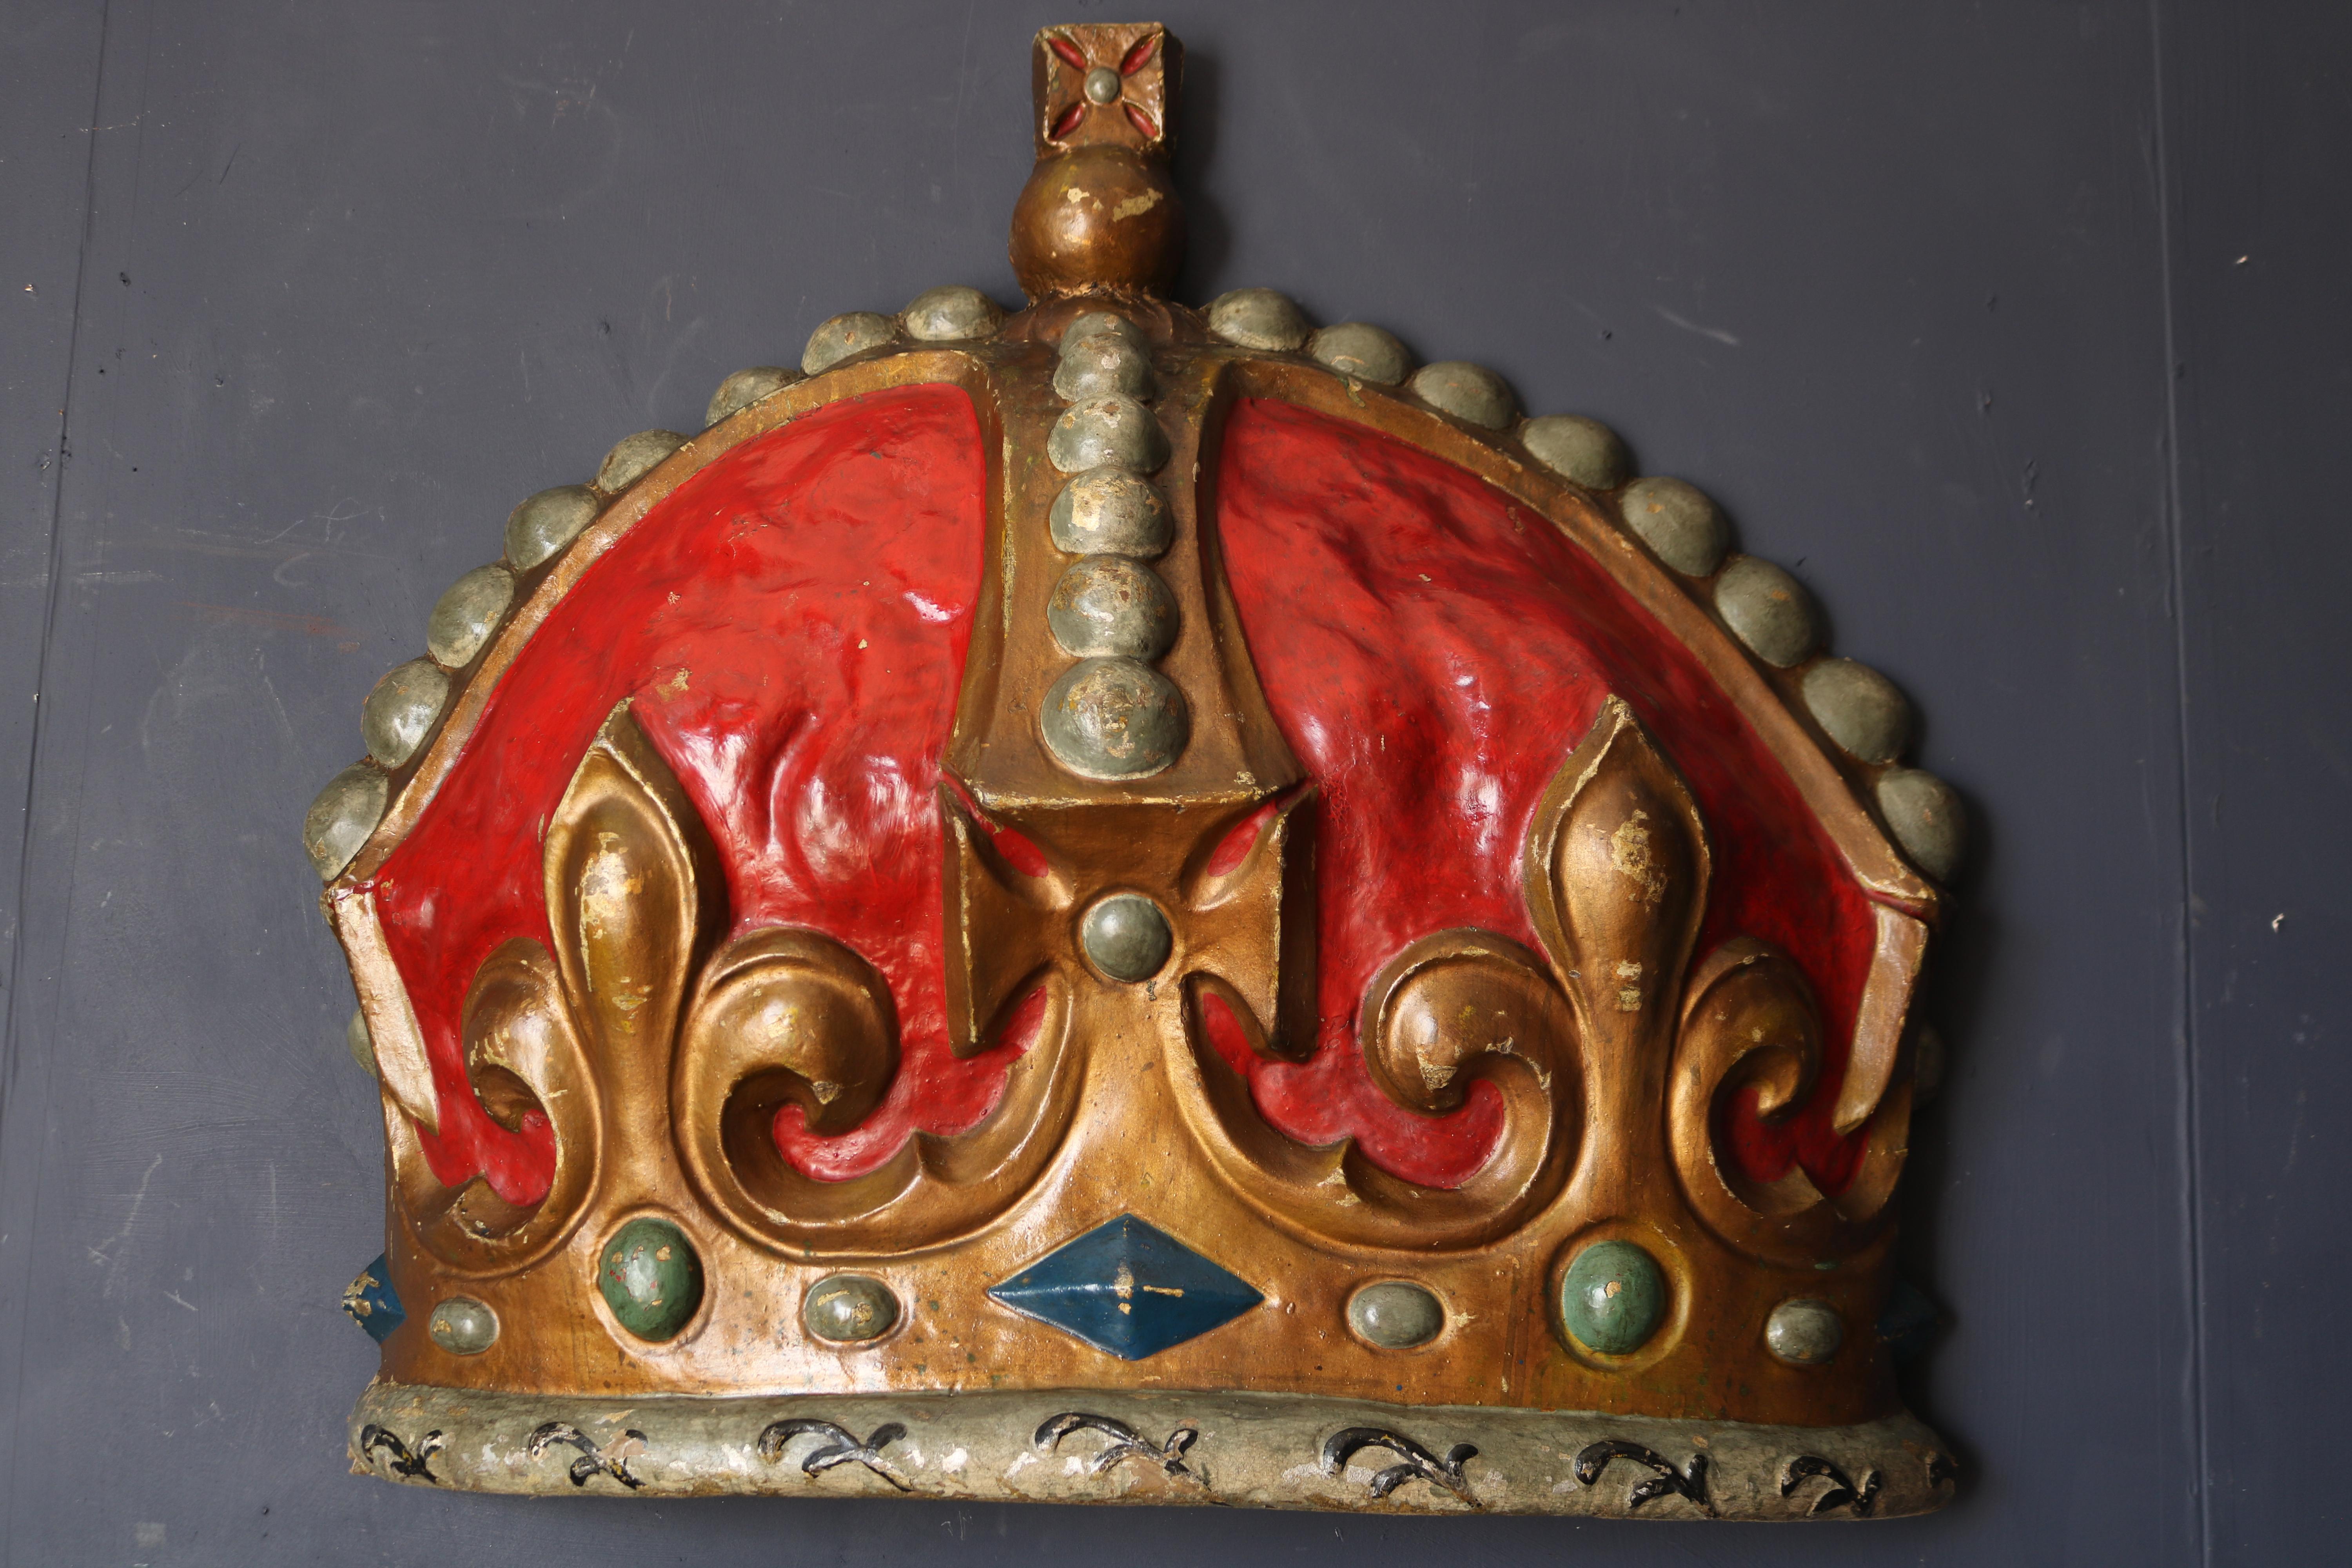 A wonderful large Papier mâché crown from the coronation of King George VI and Elizabeth 12th May 1937 at Westminster Abbey, the crown was probably used as decoration on the streets of London or in a town hall etc.. The crown its self is exquisitely